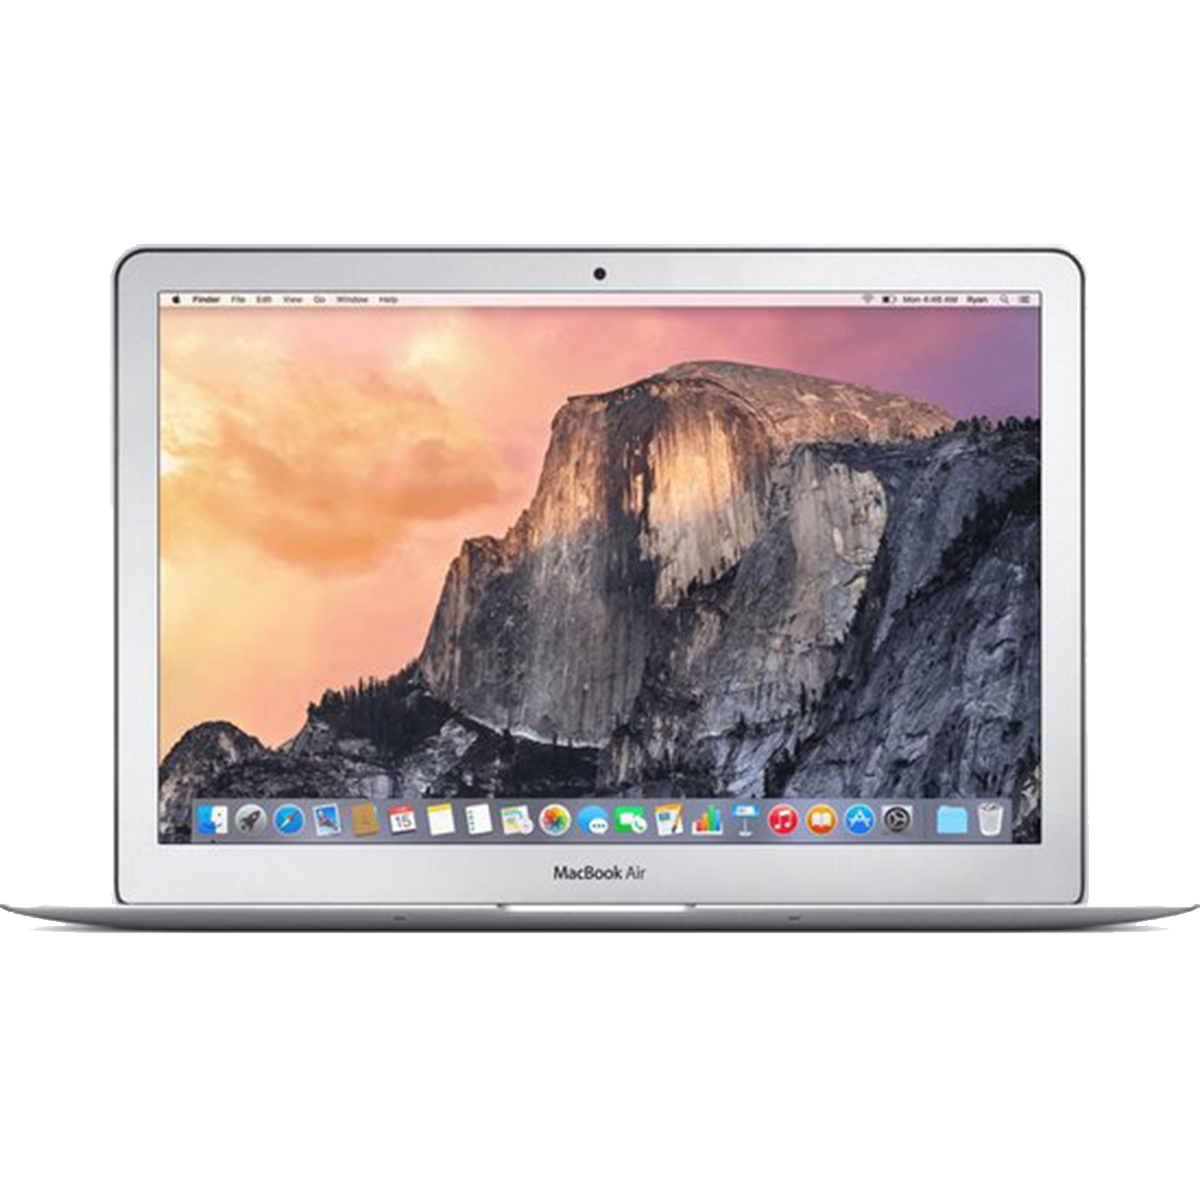 MacBook Air 13-inch | Core i7 2.2 GHz | 256 GB SSD | 8 GB RAM | Zilver (Early 2015) | Qwerty/Azerty/QwertzB-grade